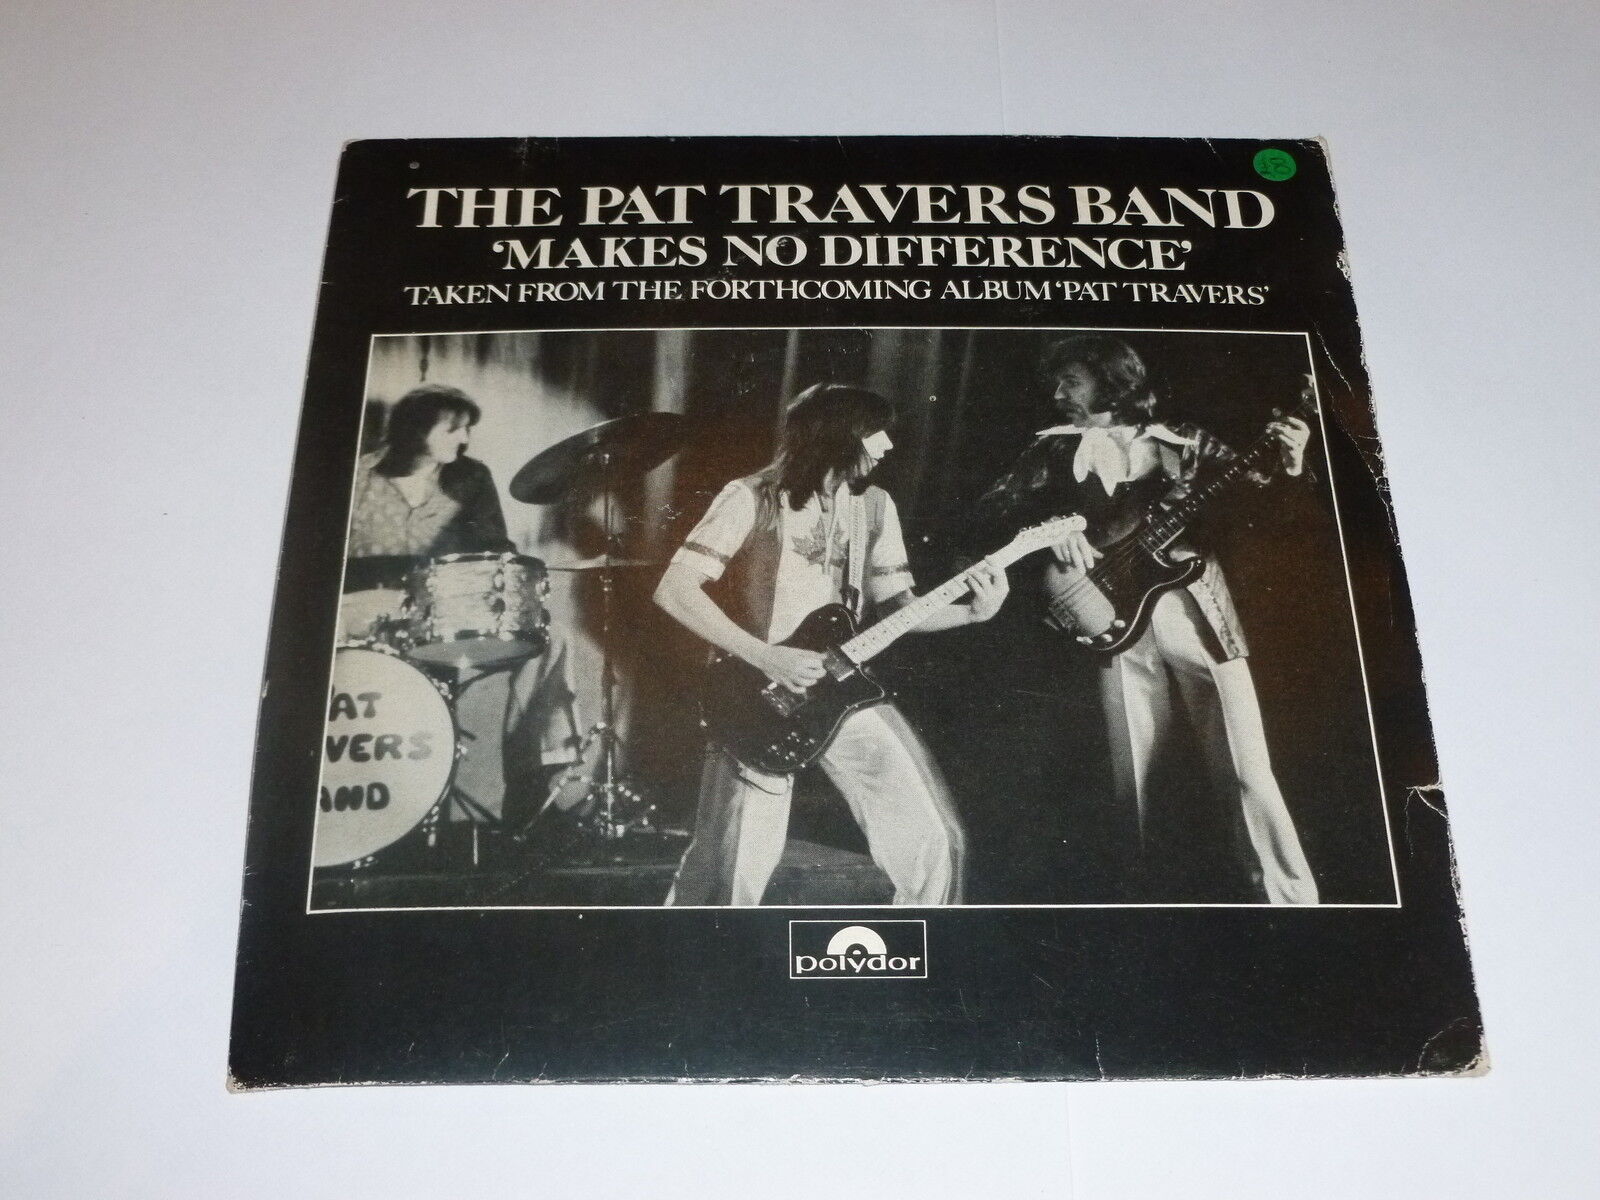 The pat travers band